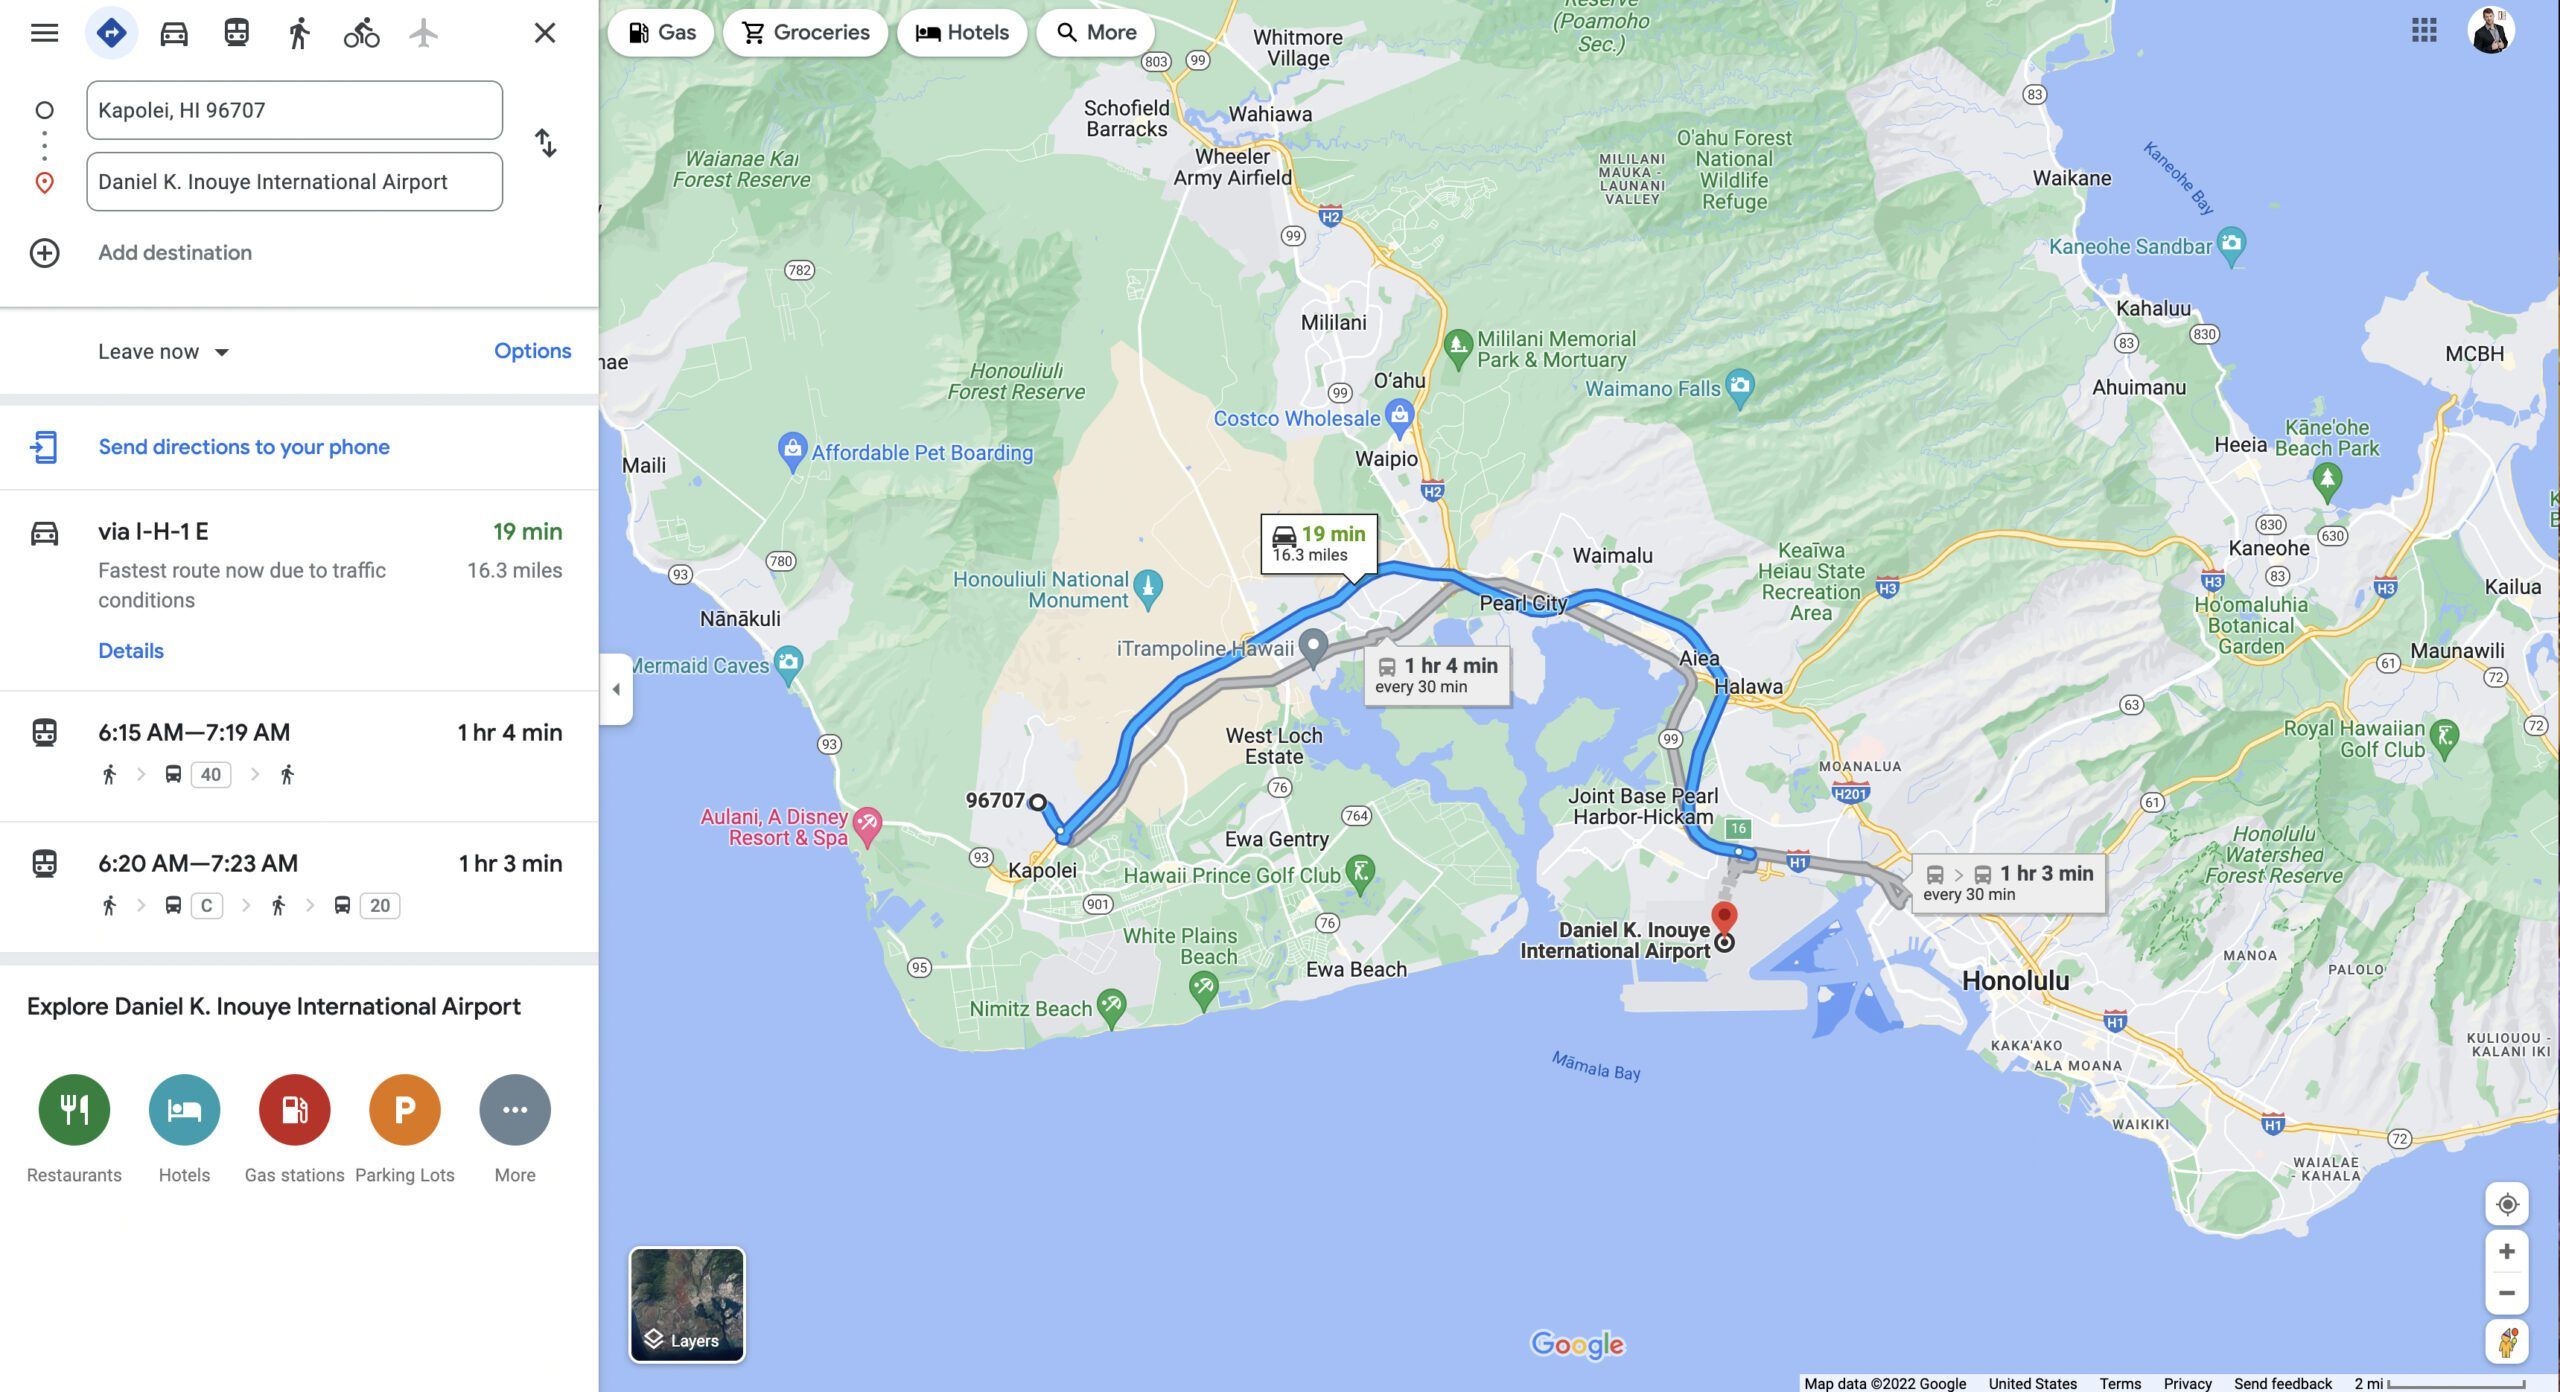 how far is kapolei from honolulu airport